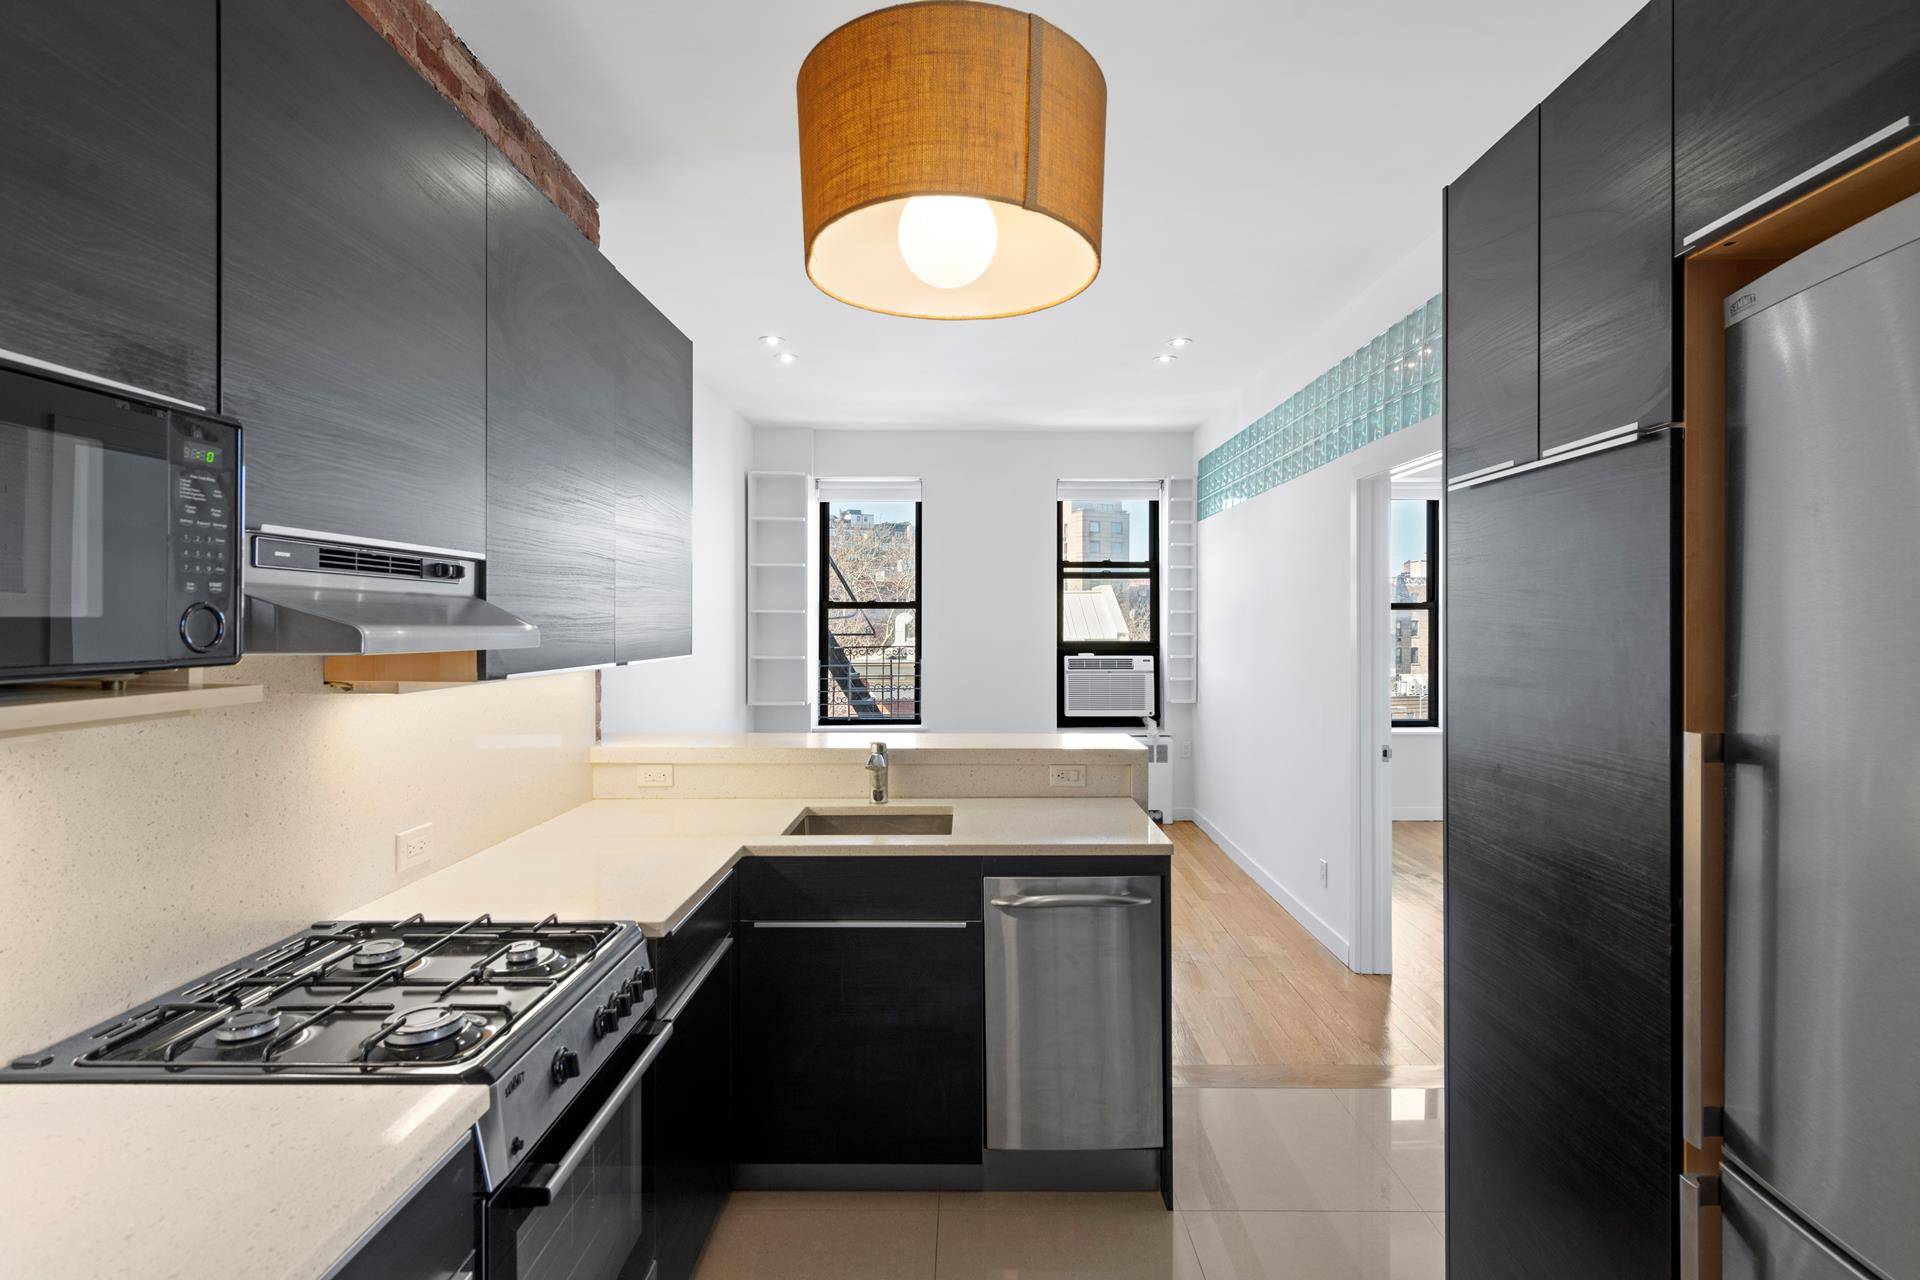 Welcome to your charming 1 bedroom, 1 bath apartment located in the vibrant and sought after neighborhood of Soho, in the heart of New York City.